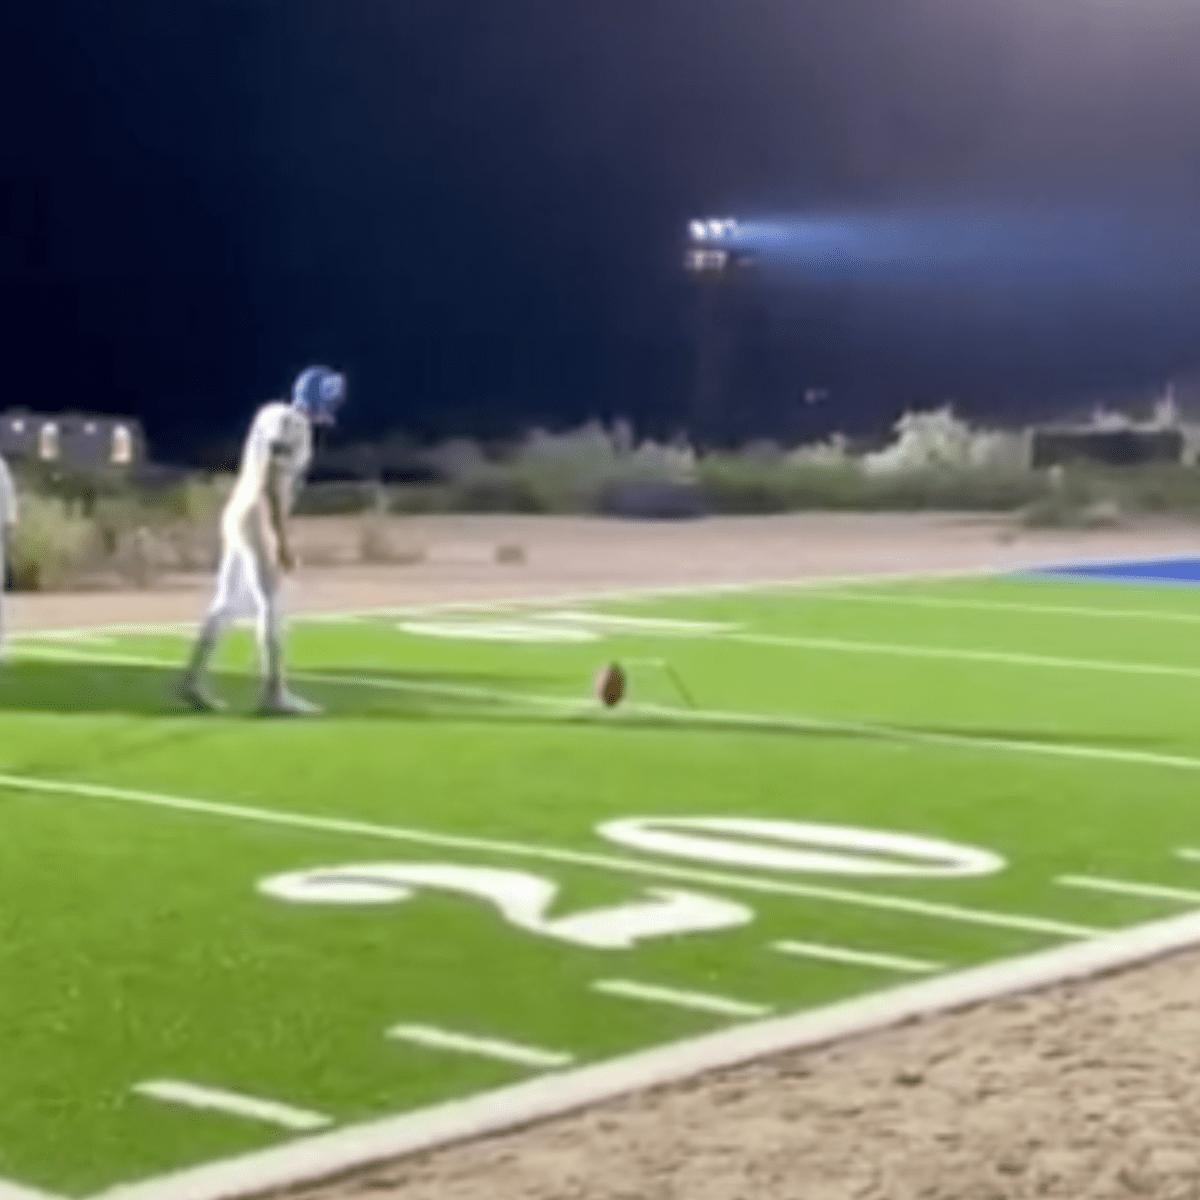 Look: There's Controversy With Rob Gronkowski's Live Field Goal